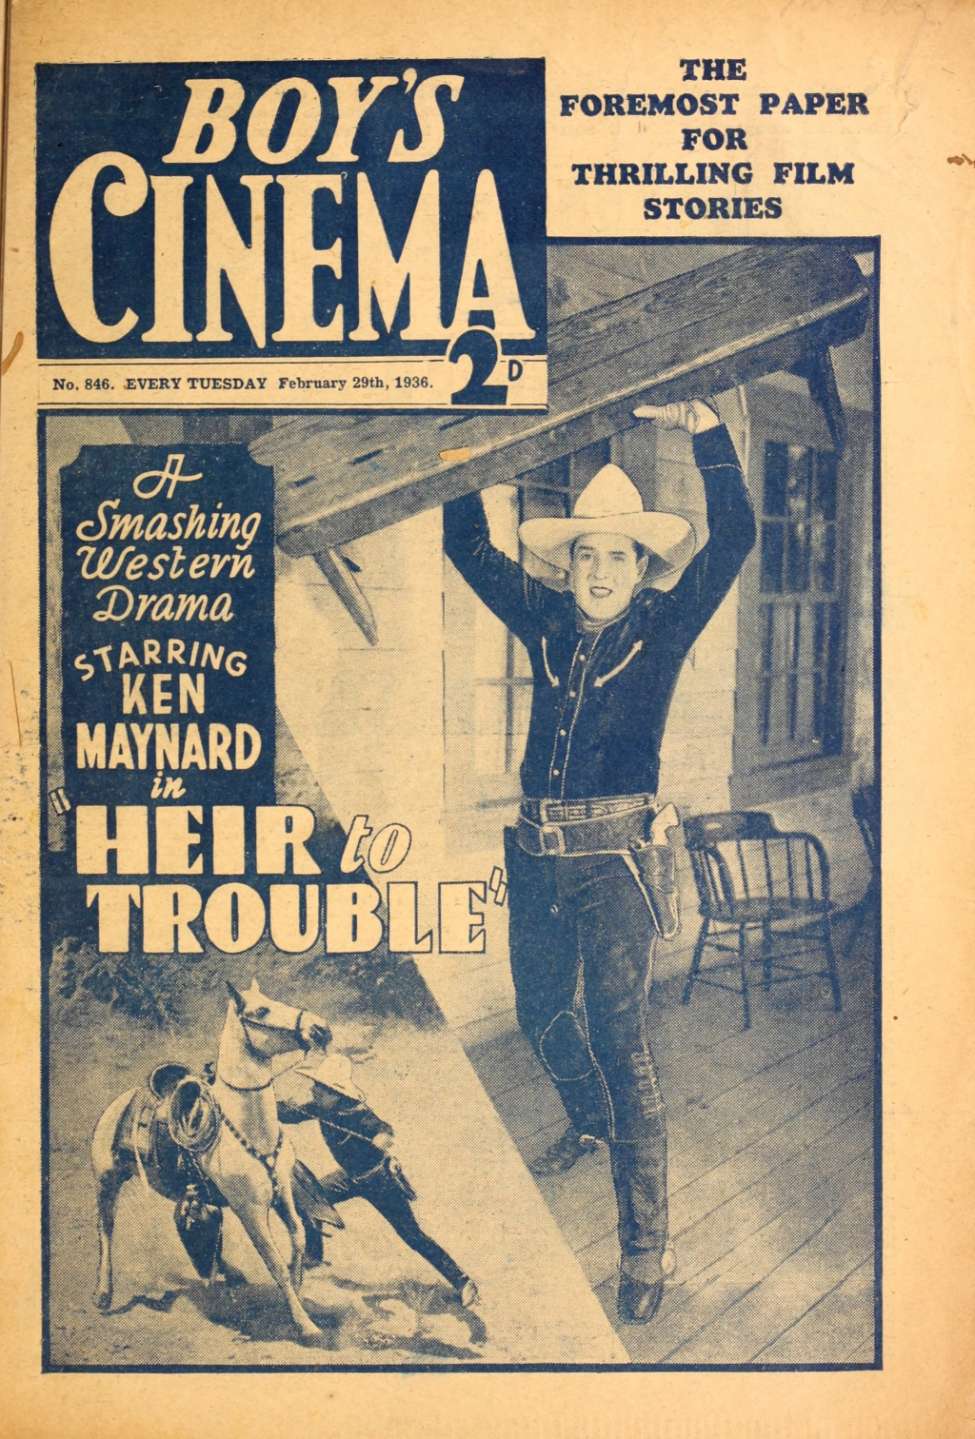 Book Cover For Boy's Cinema 846 - Heir to Trouble - Ken Maynard